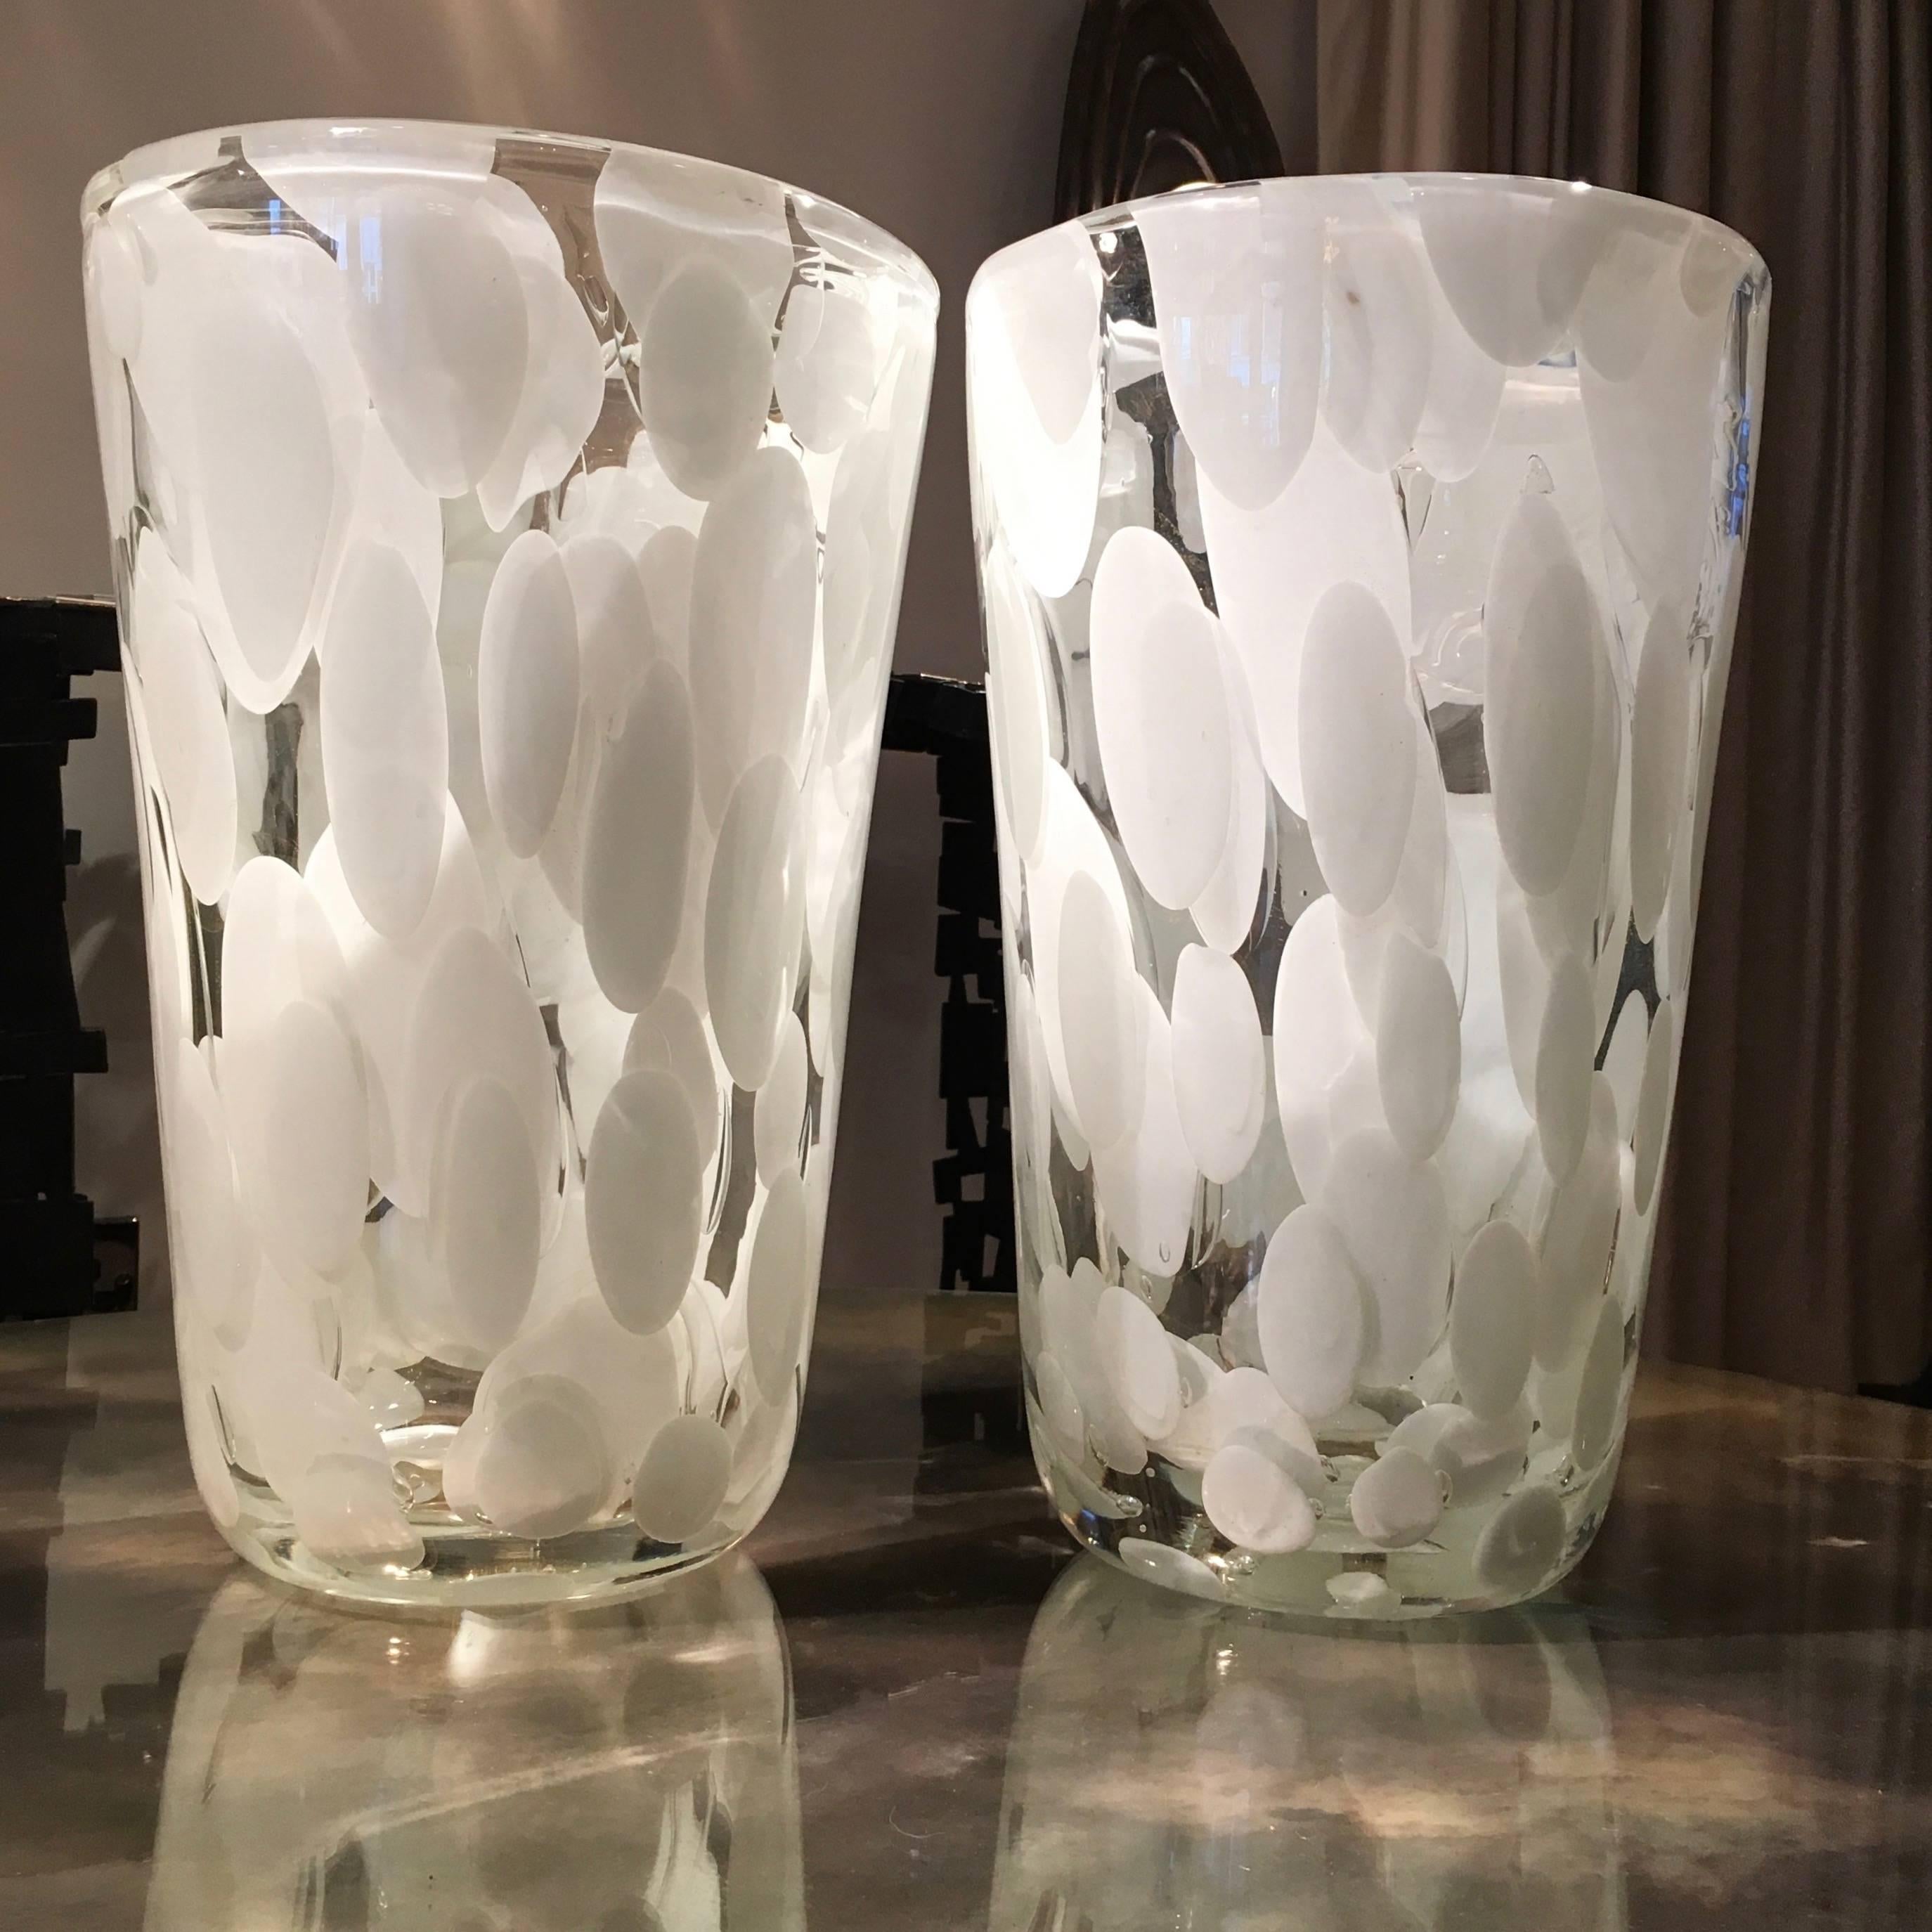 A pair of new Murano vases with white details and delicate flecks of gold leaf inside the glass. Produced on the Island of Murano, these vases are handblown allowing each to be unique.